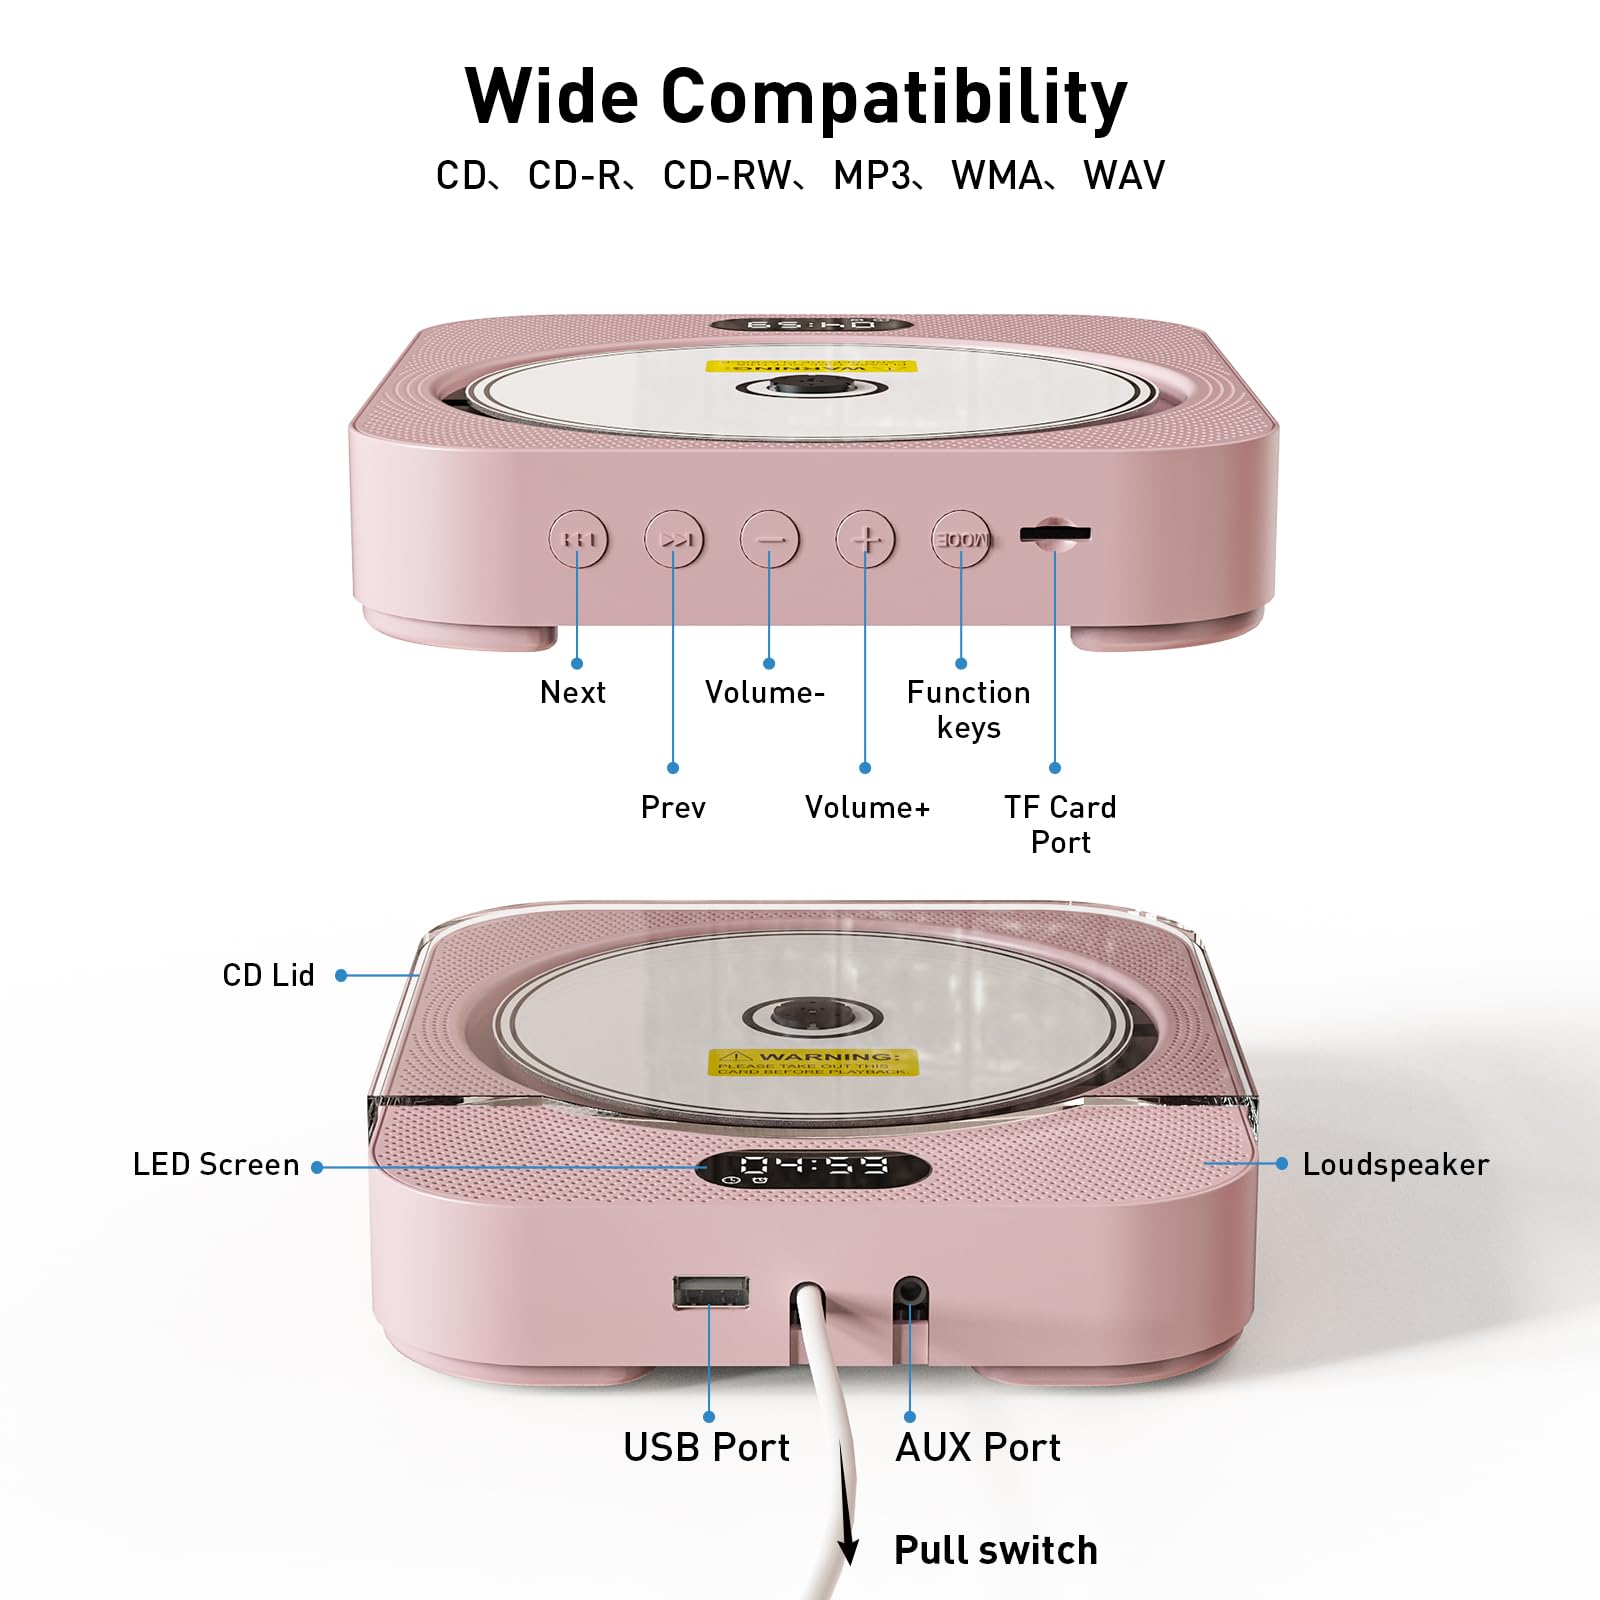 Kpop Pink CD Player Desktop/Wall,Wired Cute CD Music Player Gift for Kids with Bluetooth Speakers,CD Players for Home with Remote Control with LED Support Copy/FM Radio/Alarm Clock/CD/USB/TF/AUX